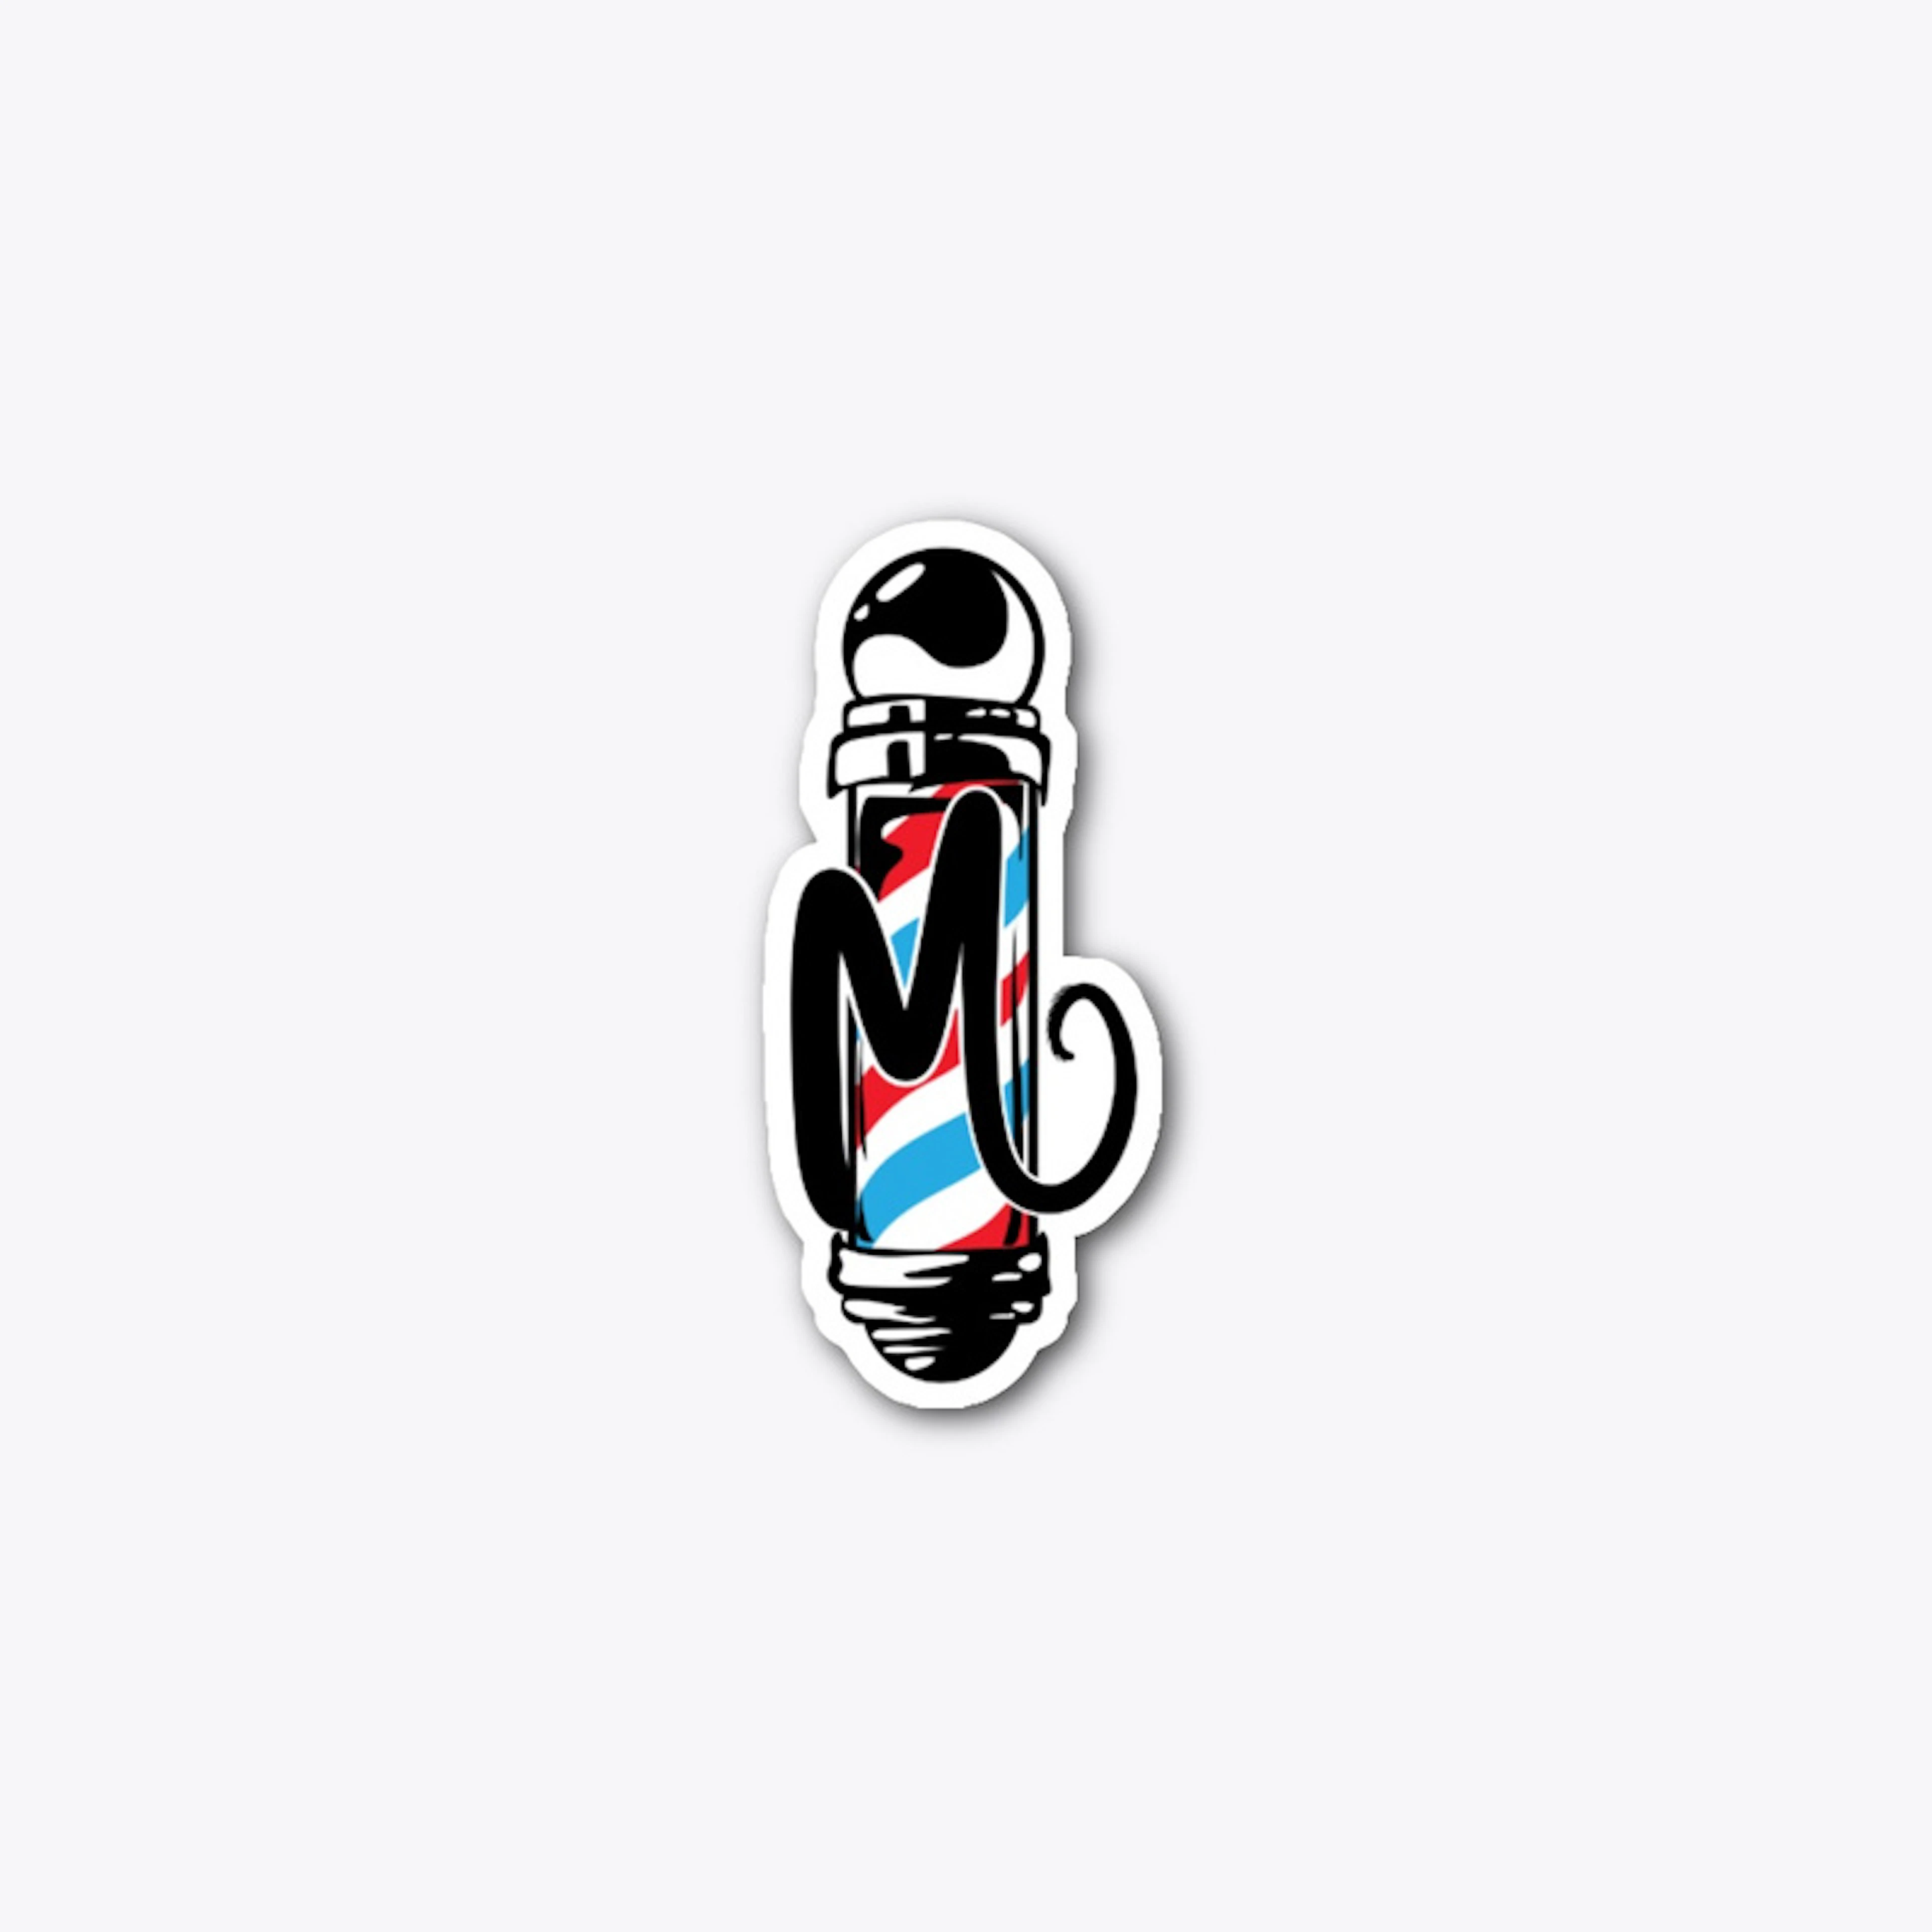 "M" Decal 